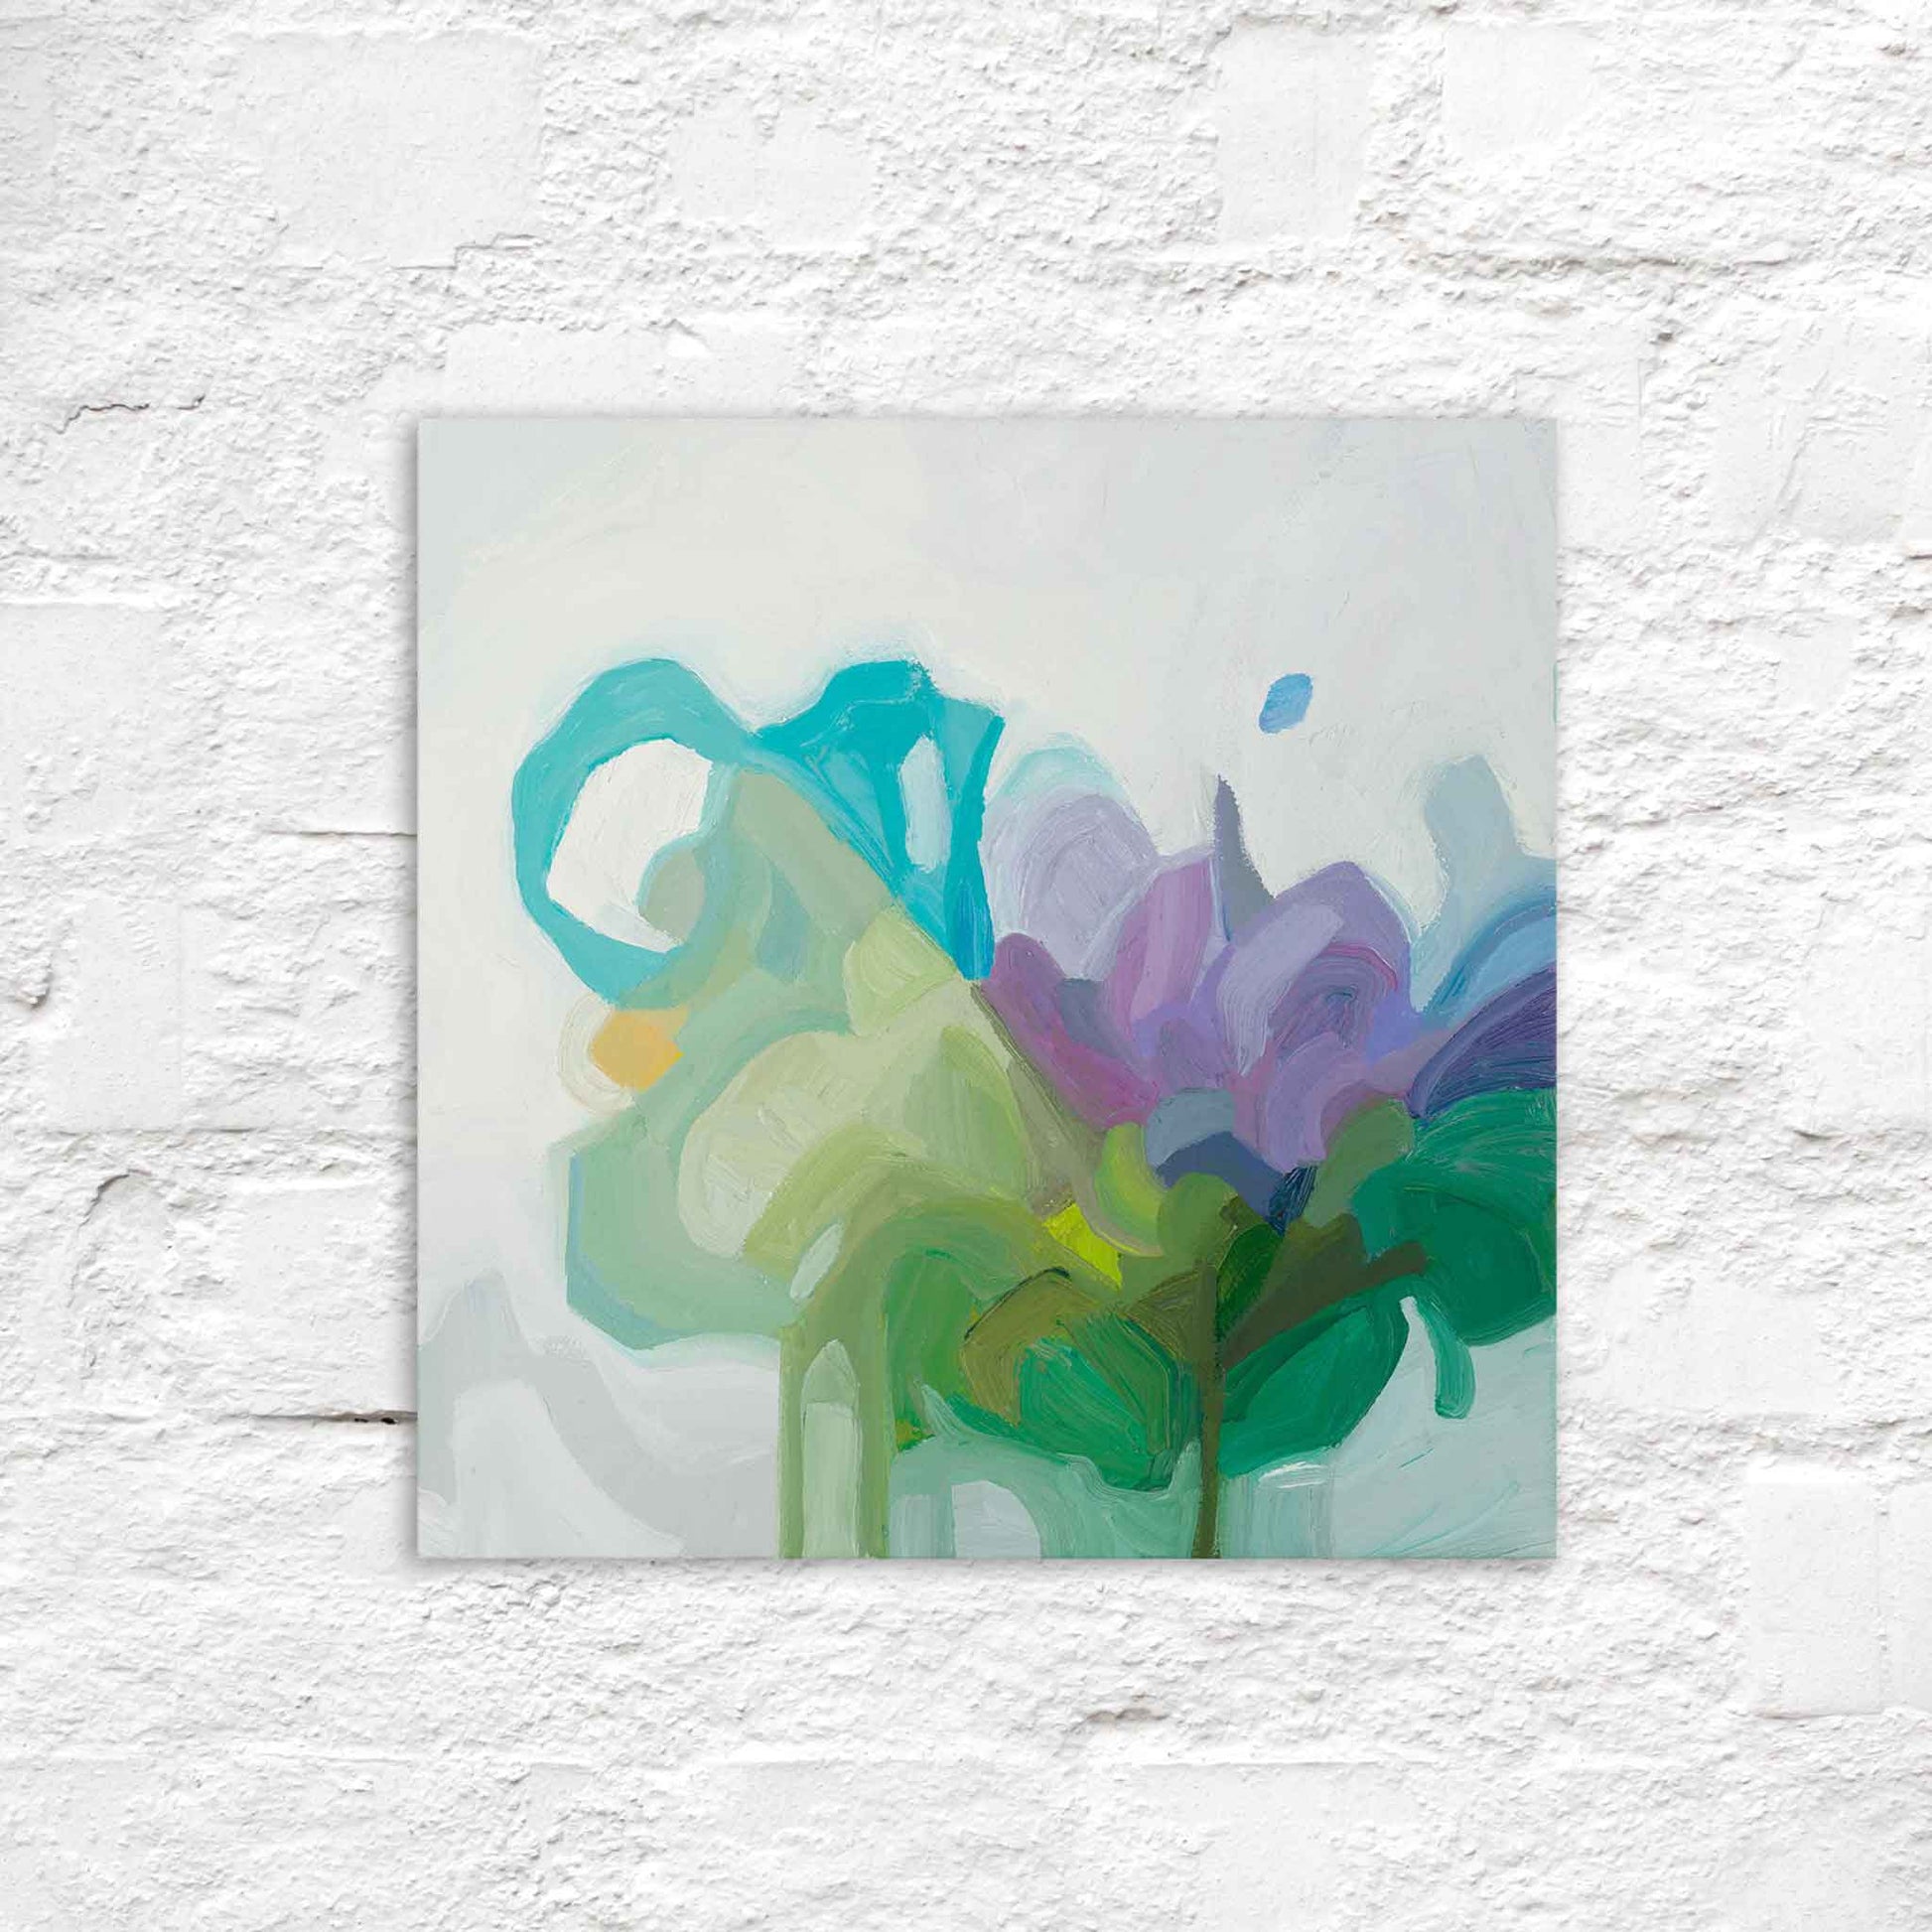 small square abstract oil painting on canvas in turquoise mauve emerald green and light green